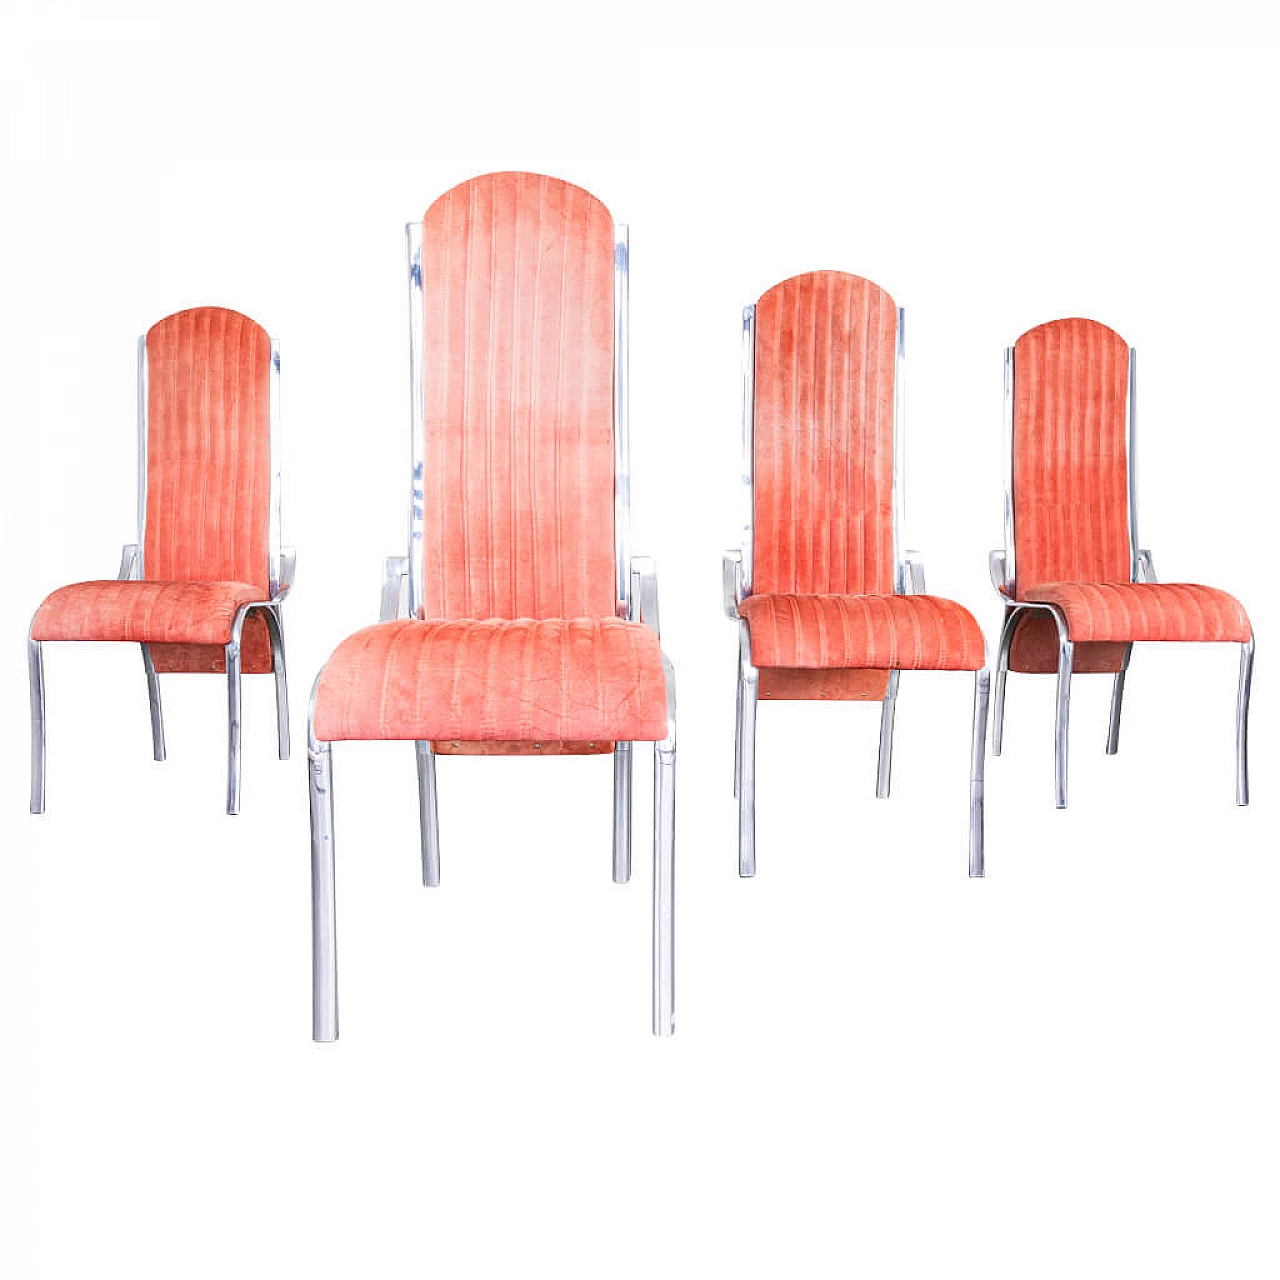 4 Chairs in metal with seat and back in red alcantara, 70s 1237265